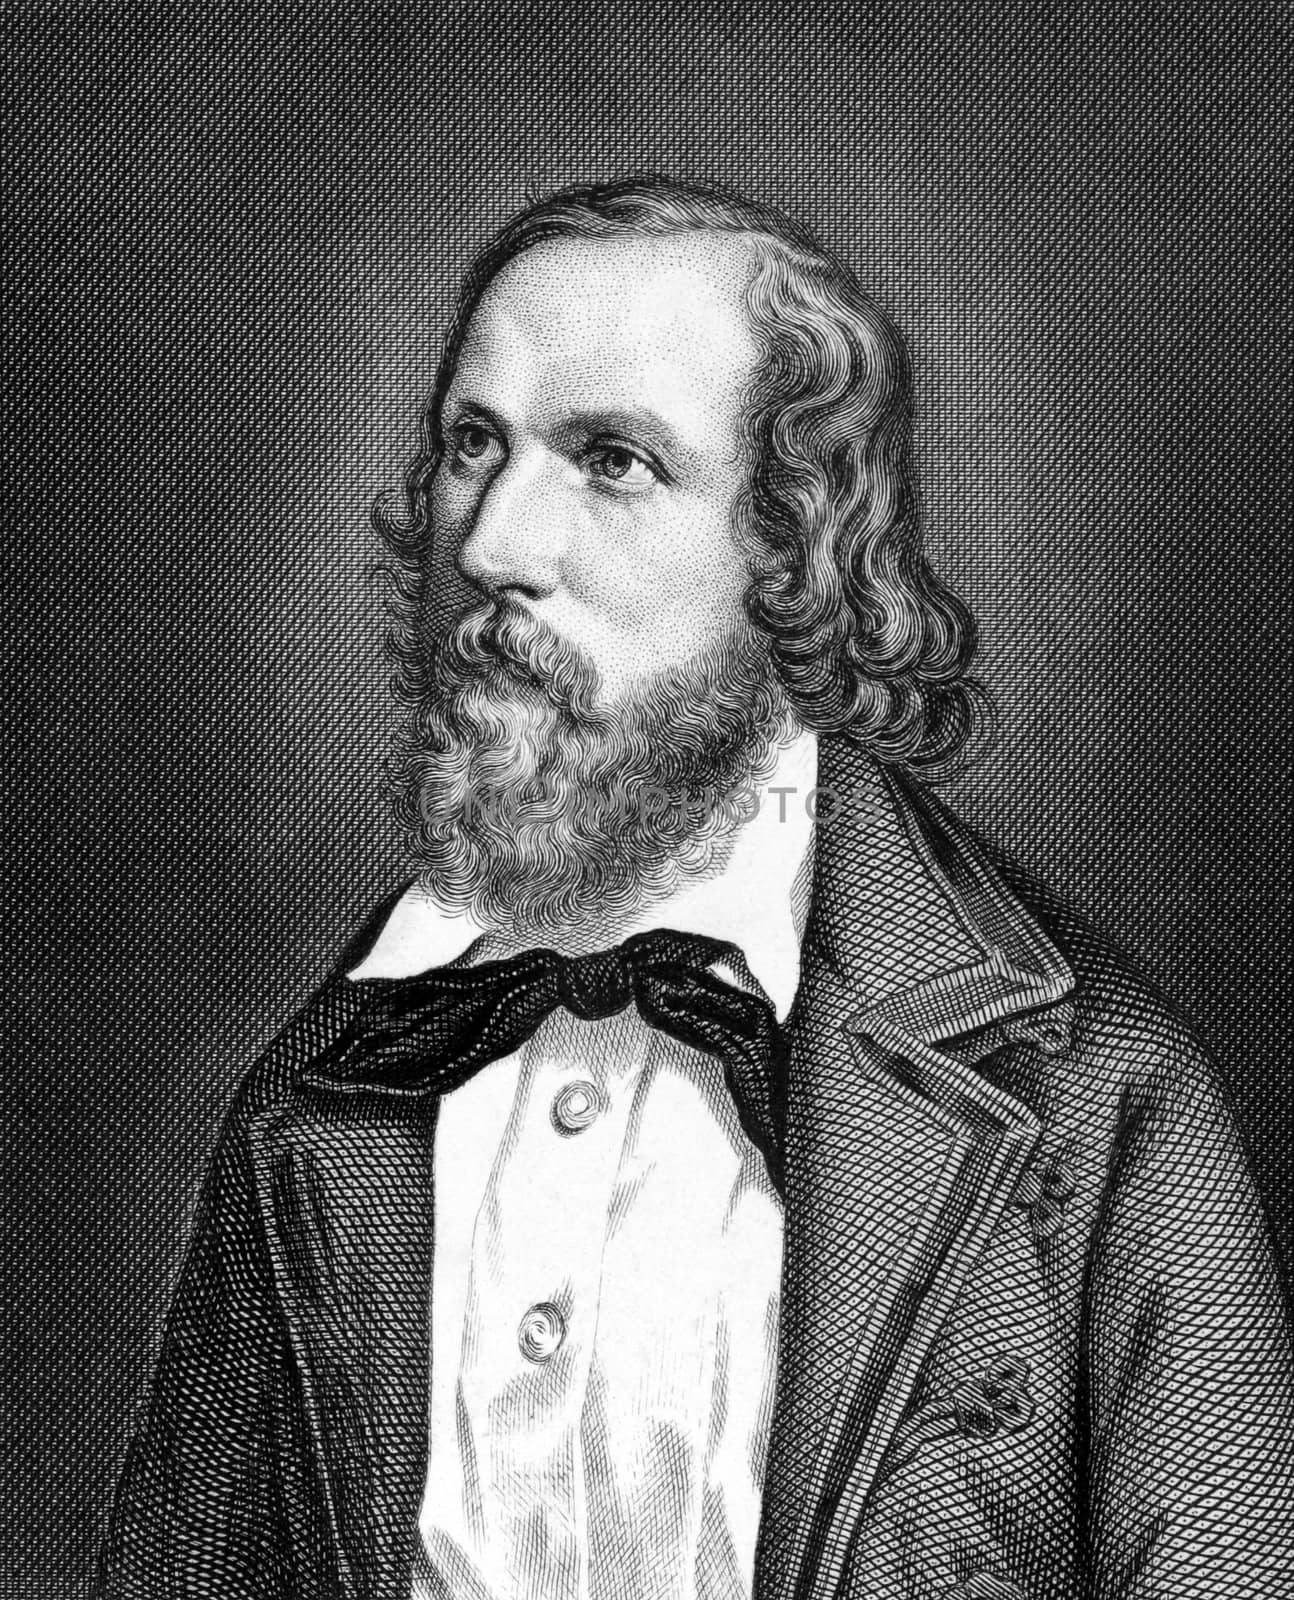 Friedrich Hecker (1811-1881) on engraving from 1859.  German lawyer, politician and revolutionary. Engraved by Nordheim and published in Meyers Konversations-Lexikon, Germany,1859.
